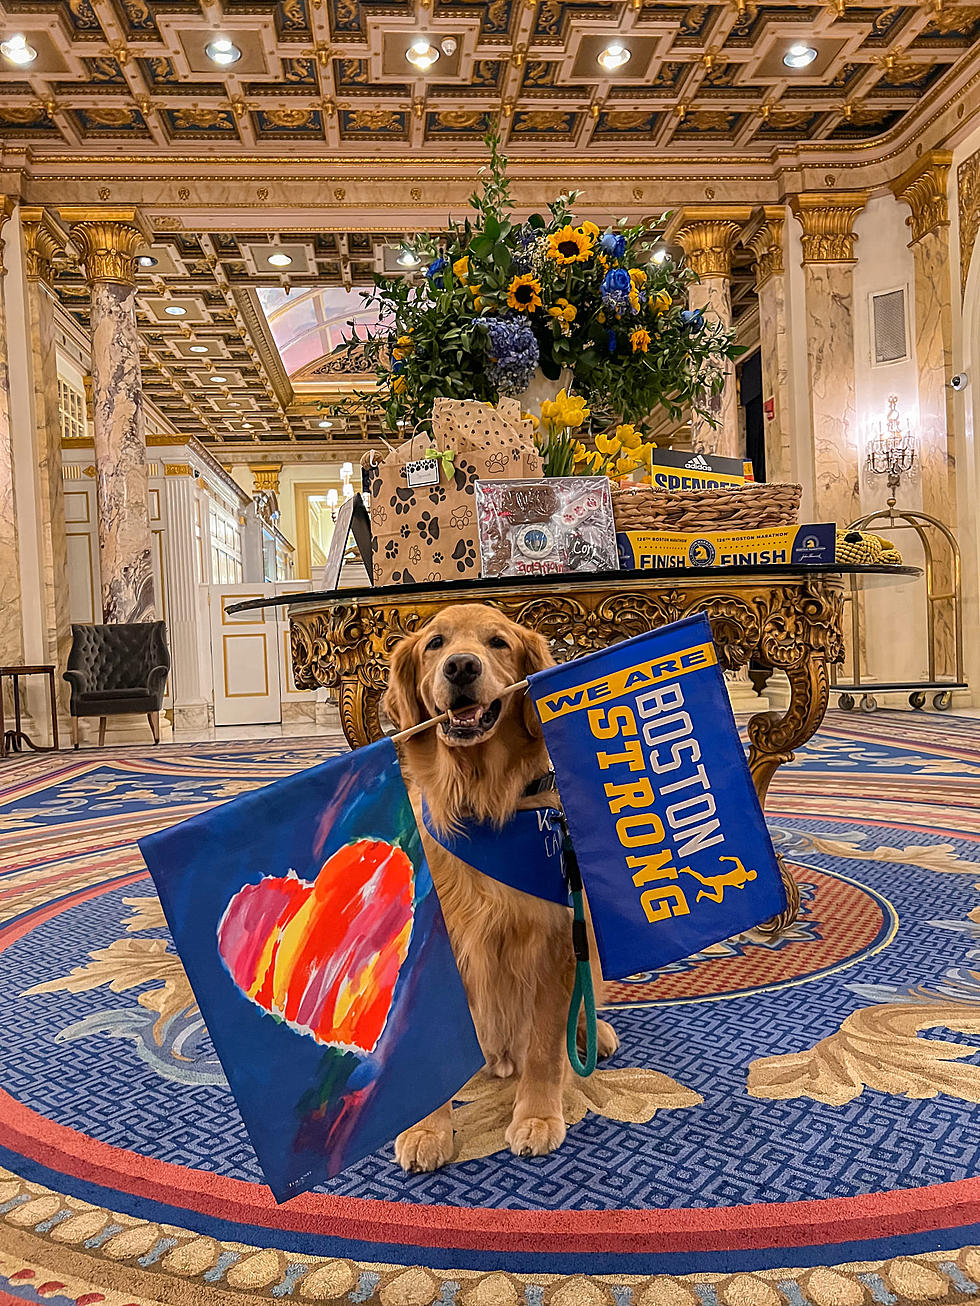 Remember When the Boston Marathon Dog Arrived in a Limo?